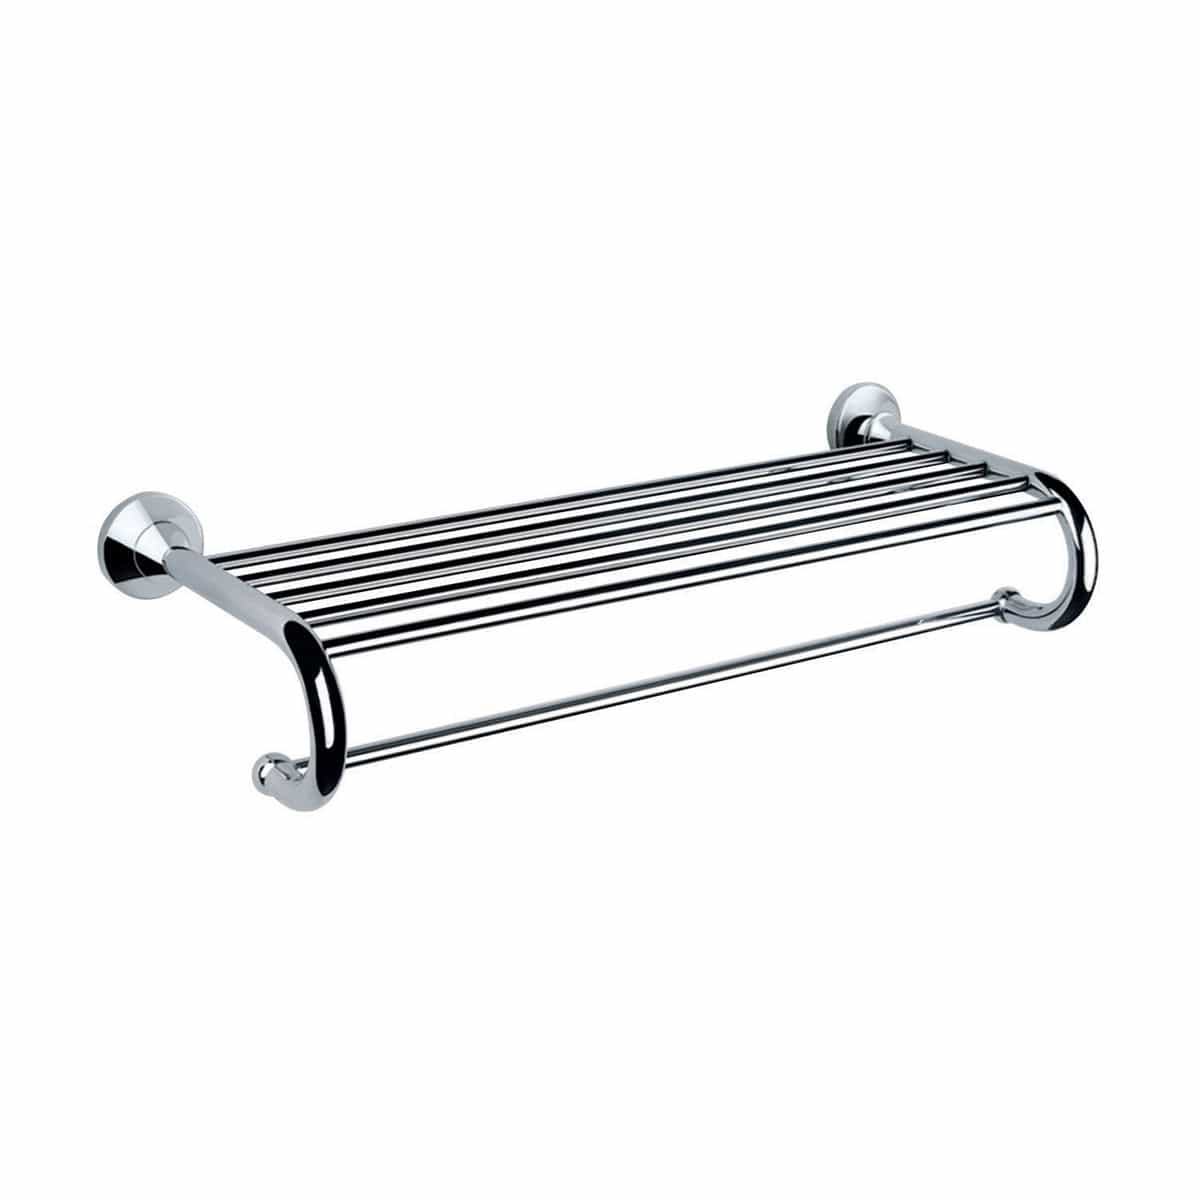 Shop Bathroom Copper Chrome Plated Six Bar Towel Rack - 7322 | Buy Online at Supply Master Accra, Ghana Bathroom Accessories Buy Tools hardware Building materials